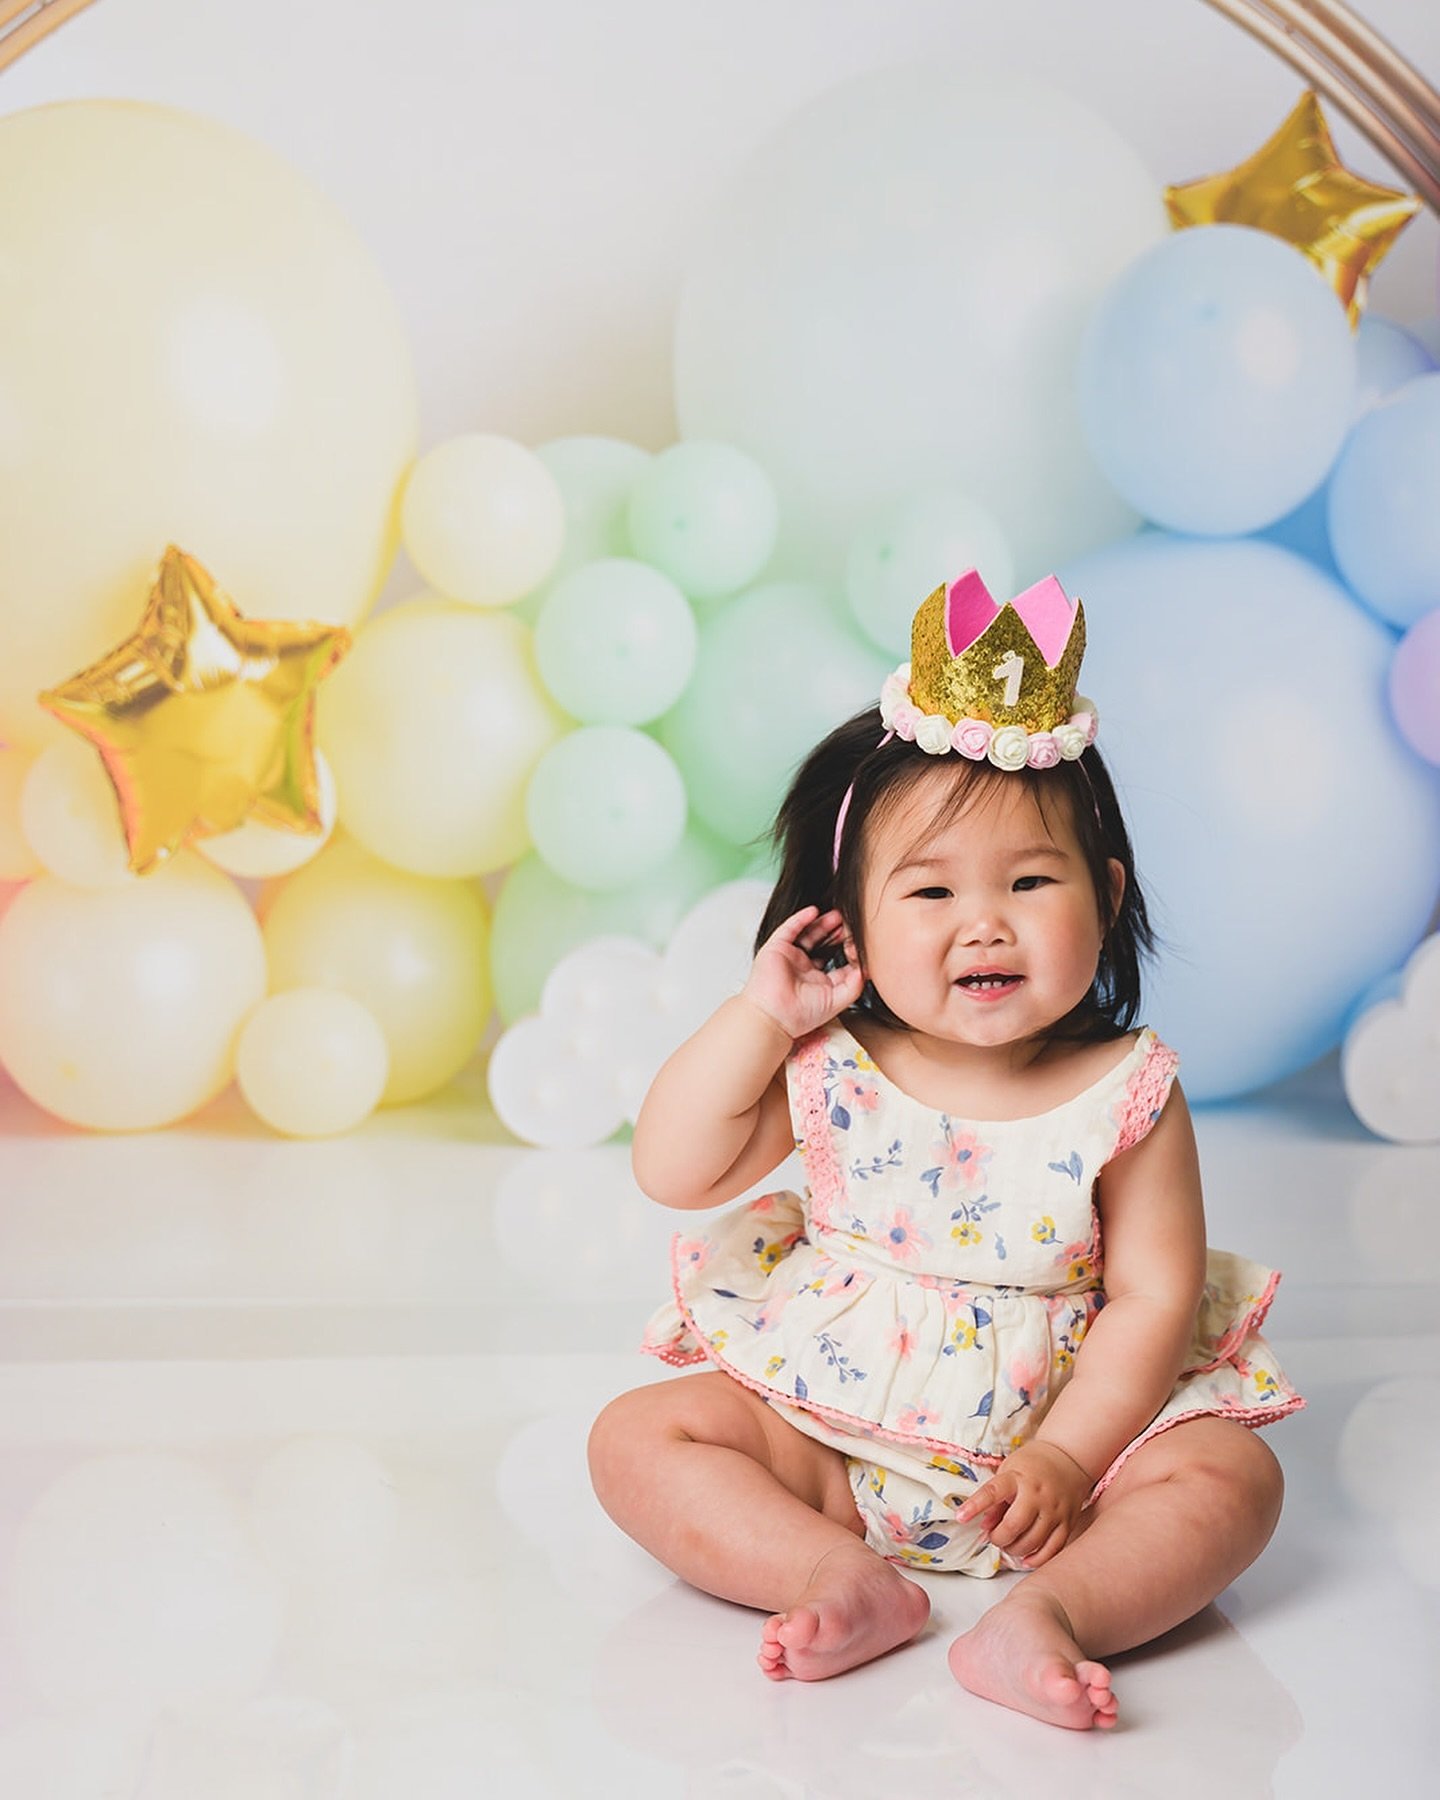 Happy Friday everyone! Swipe to see the stages of a cake smash session 😍🎂 How precious is this little one?! Some of my favorite photos to take!